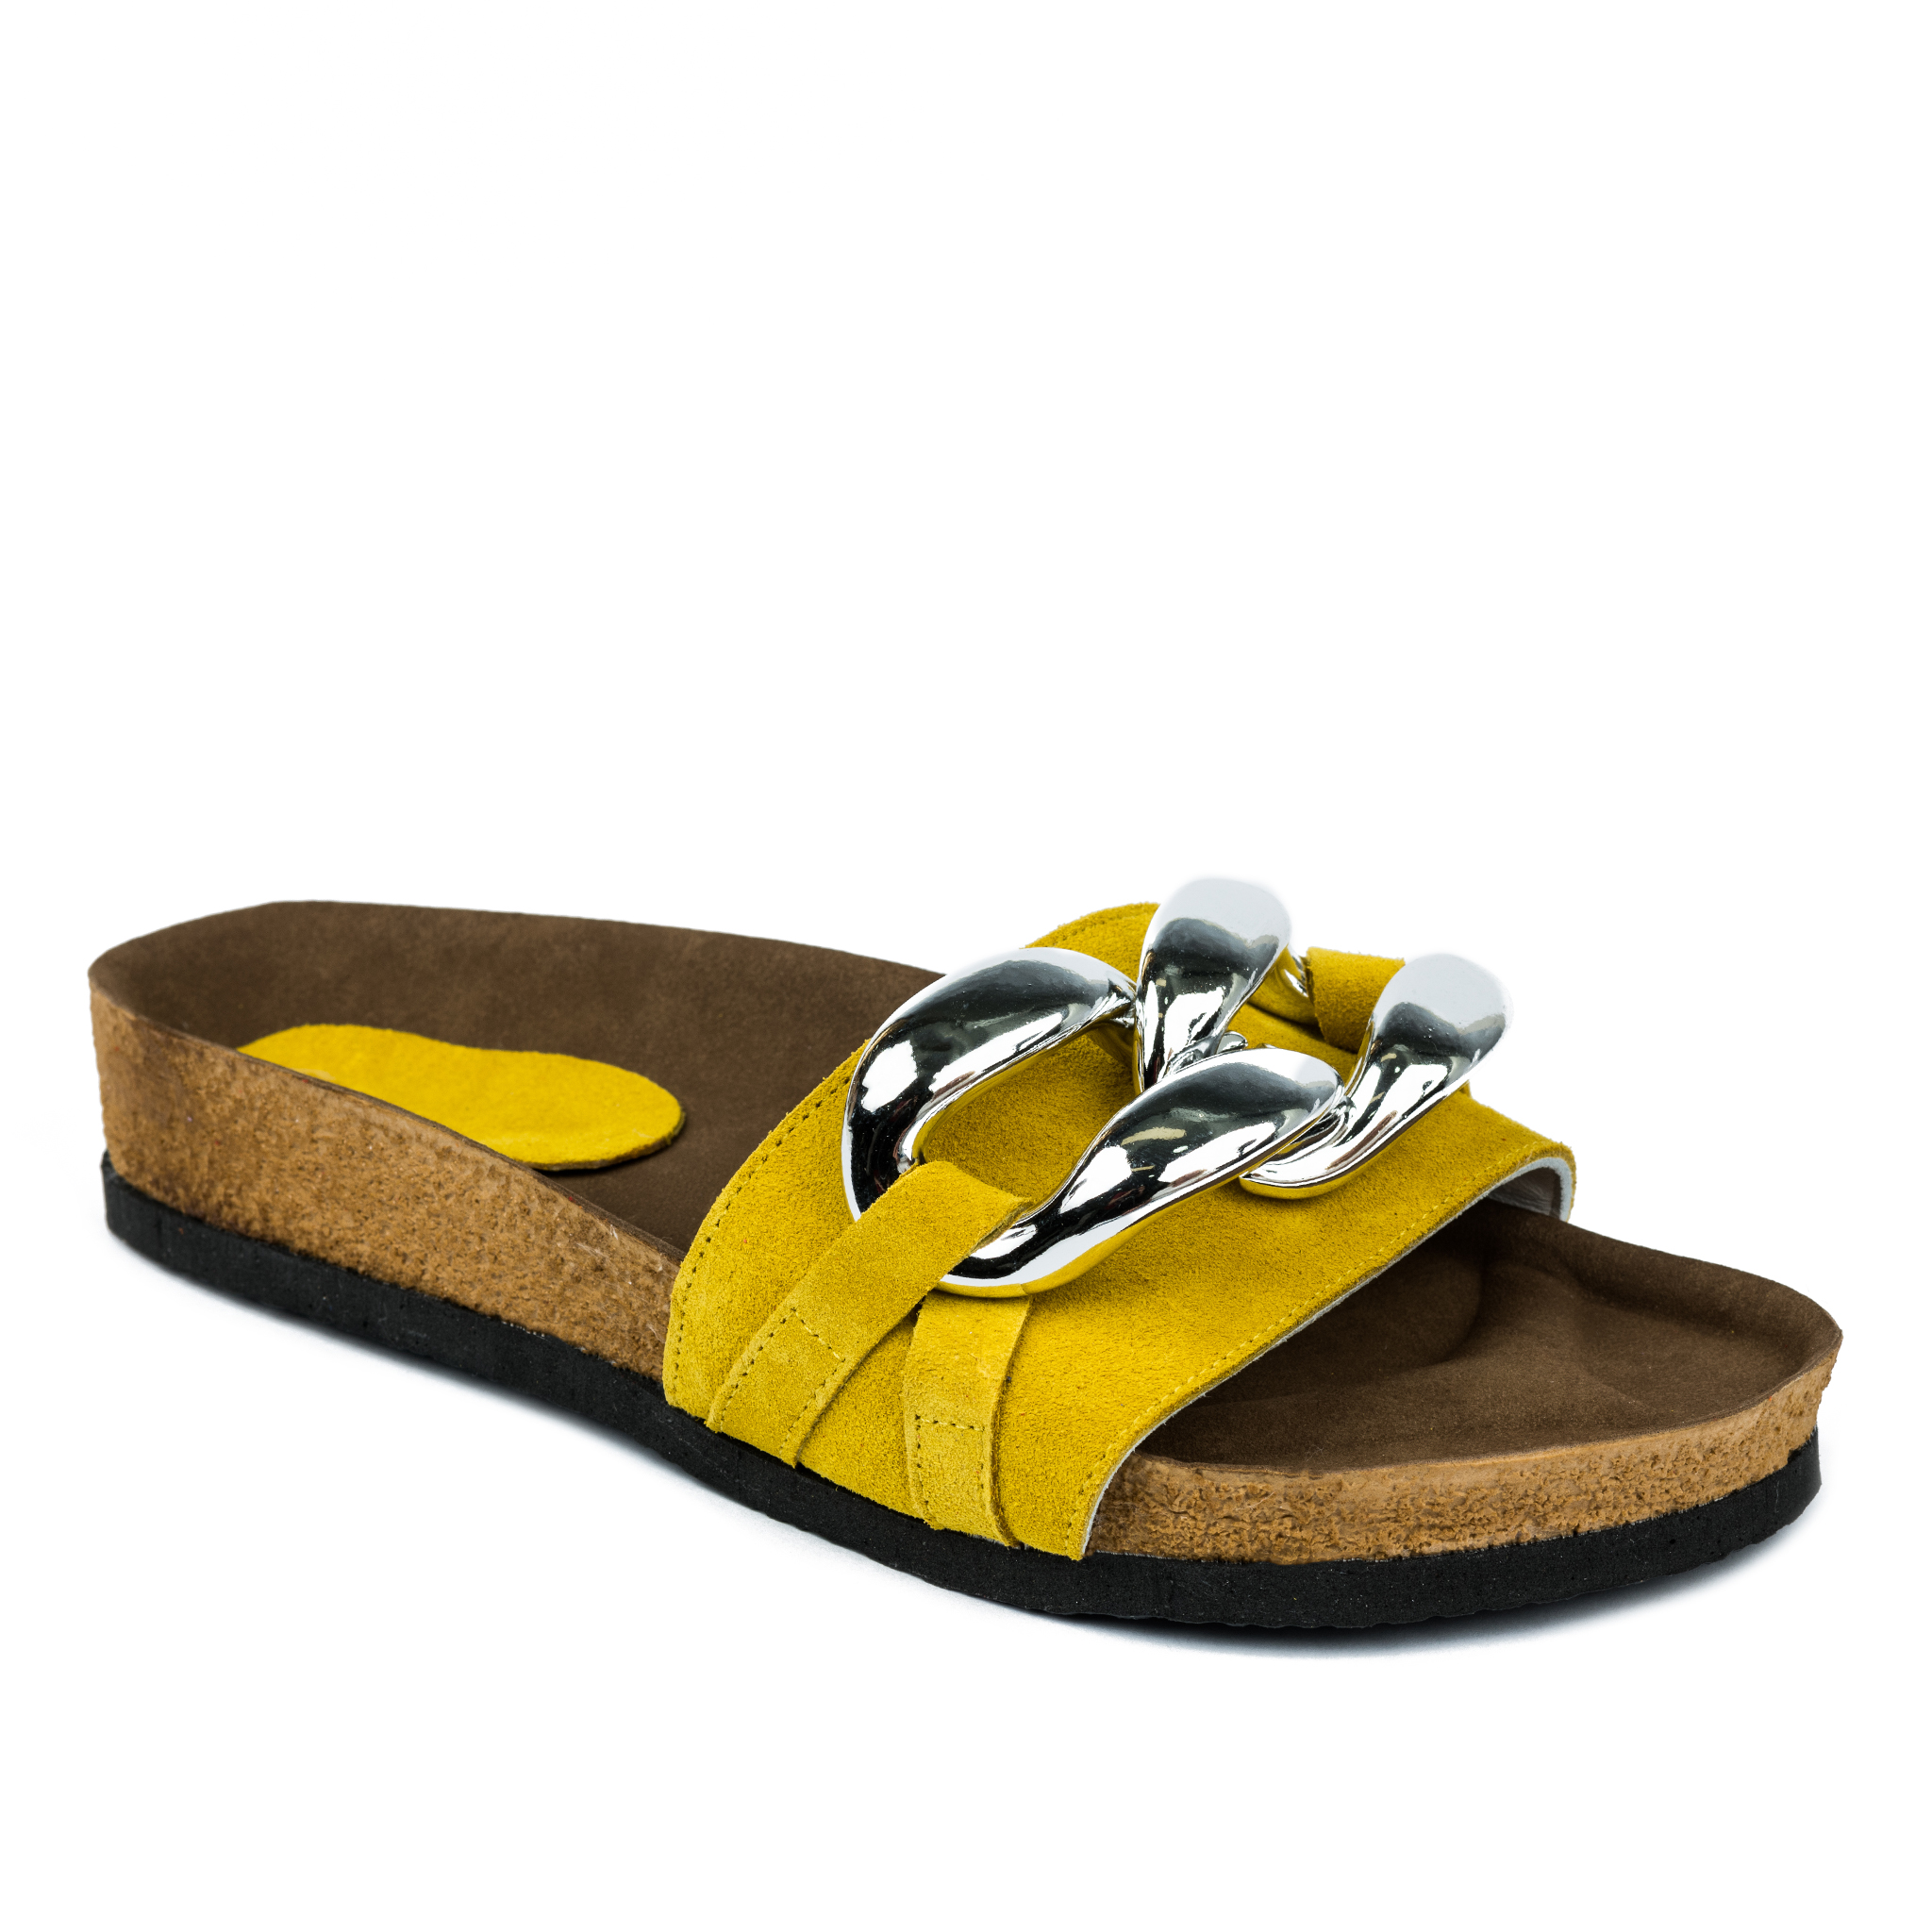 Leather slippers A741 - OCHRE